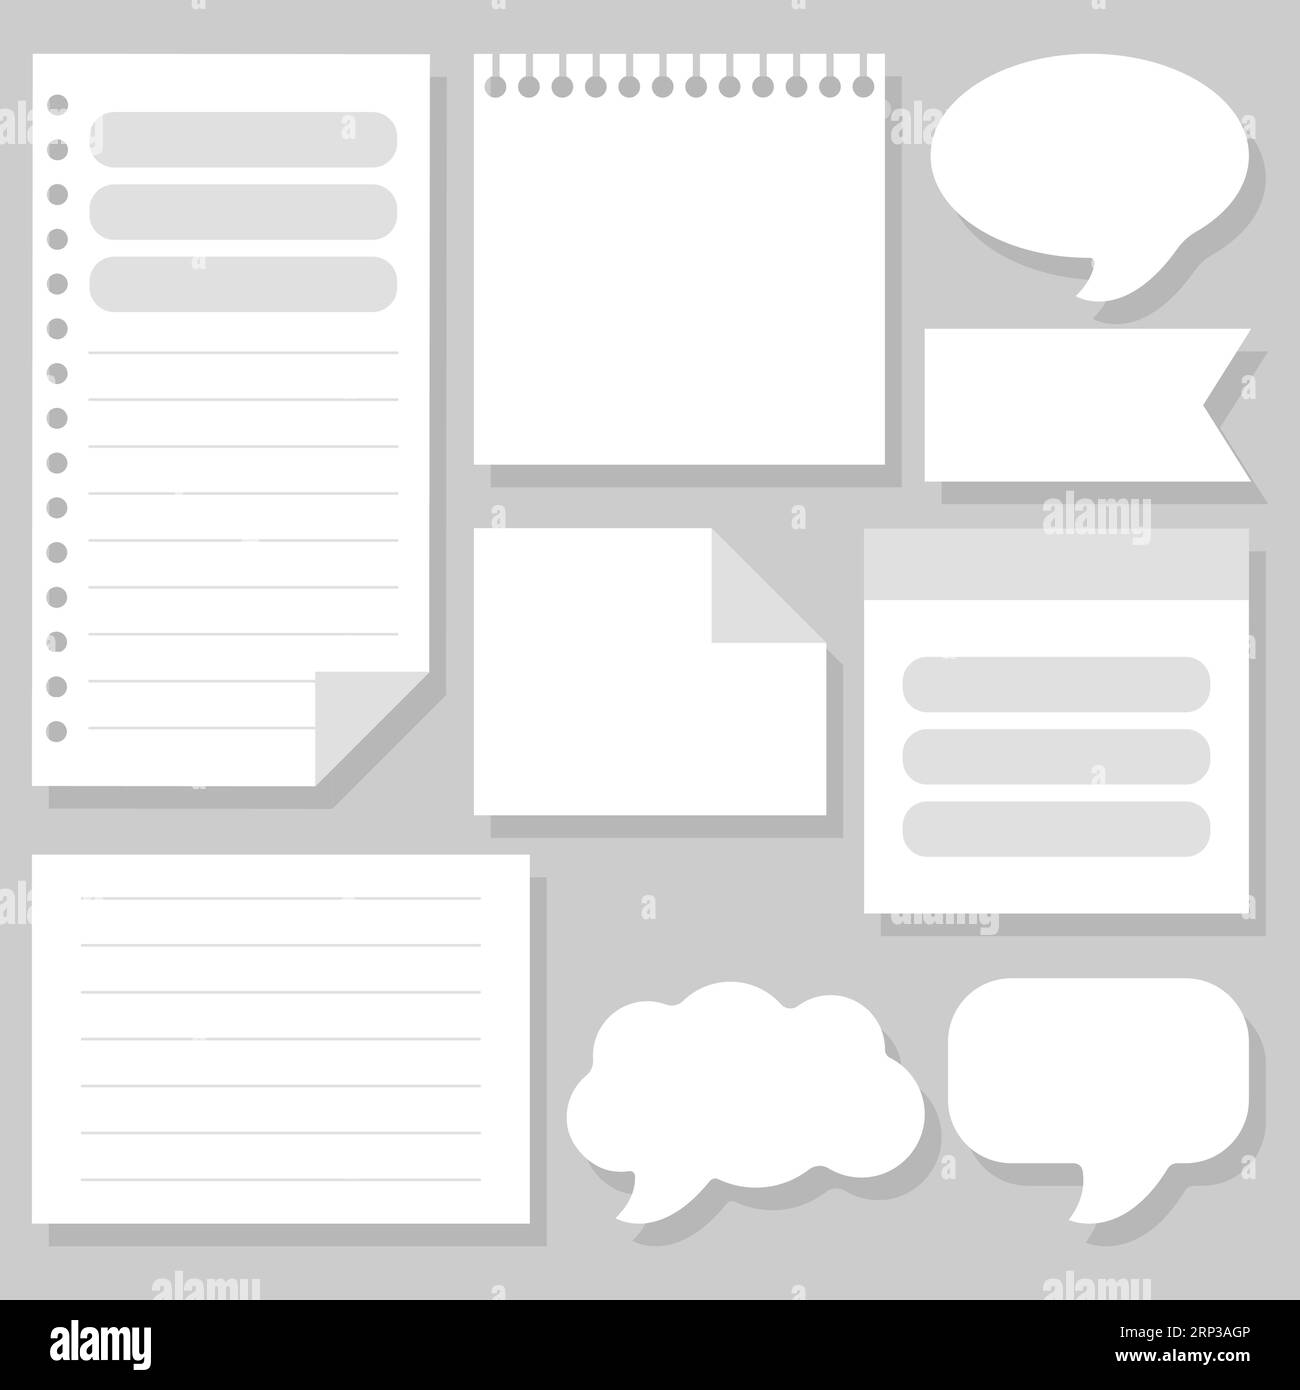 A Cloud Speech Bubble Over a Pad of Sticky Notes · Free Stock Photo